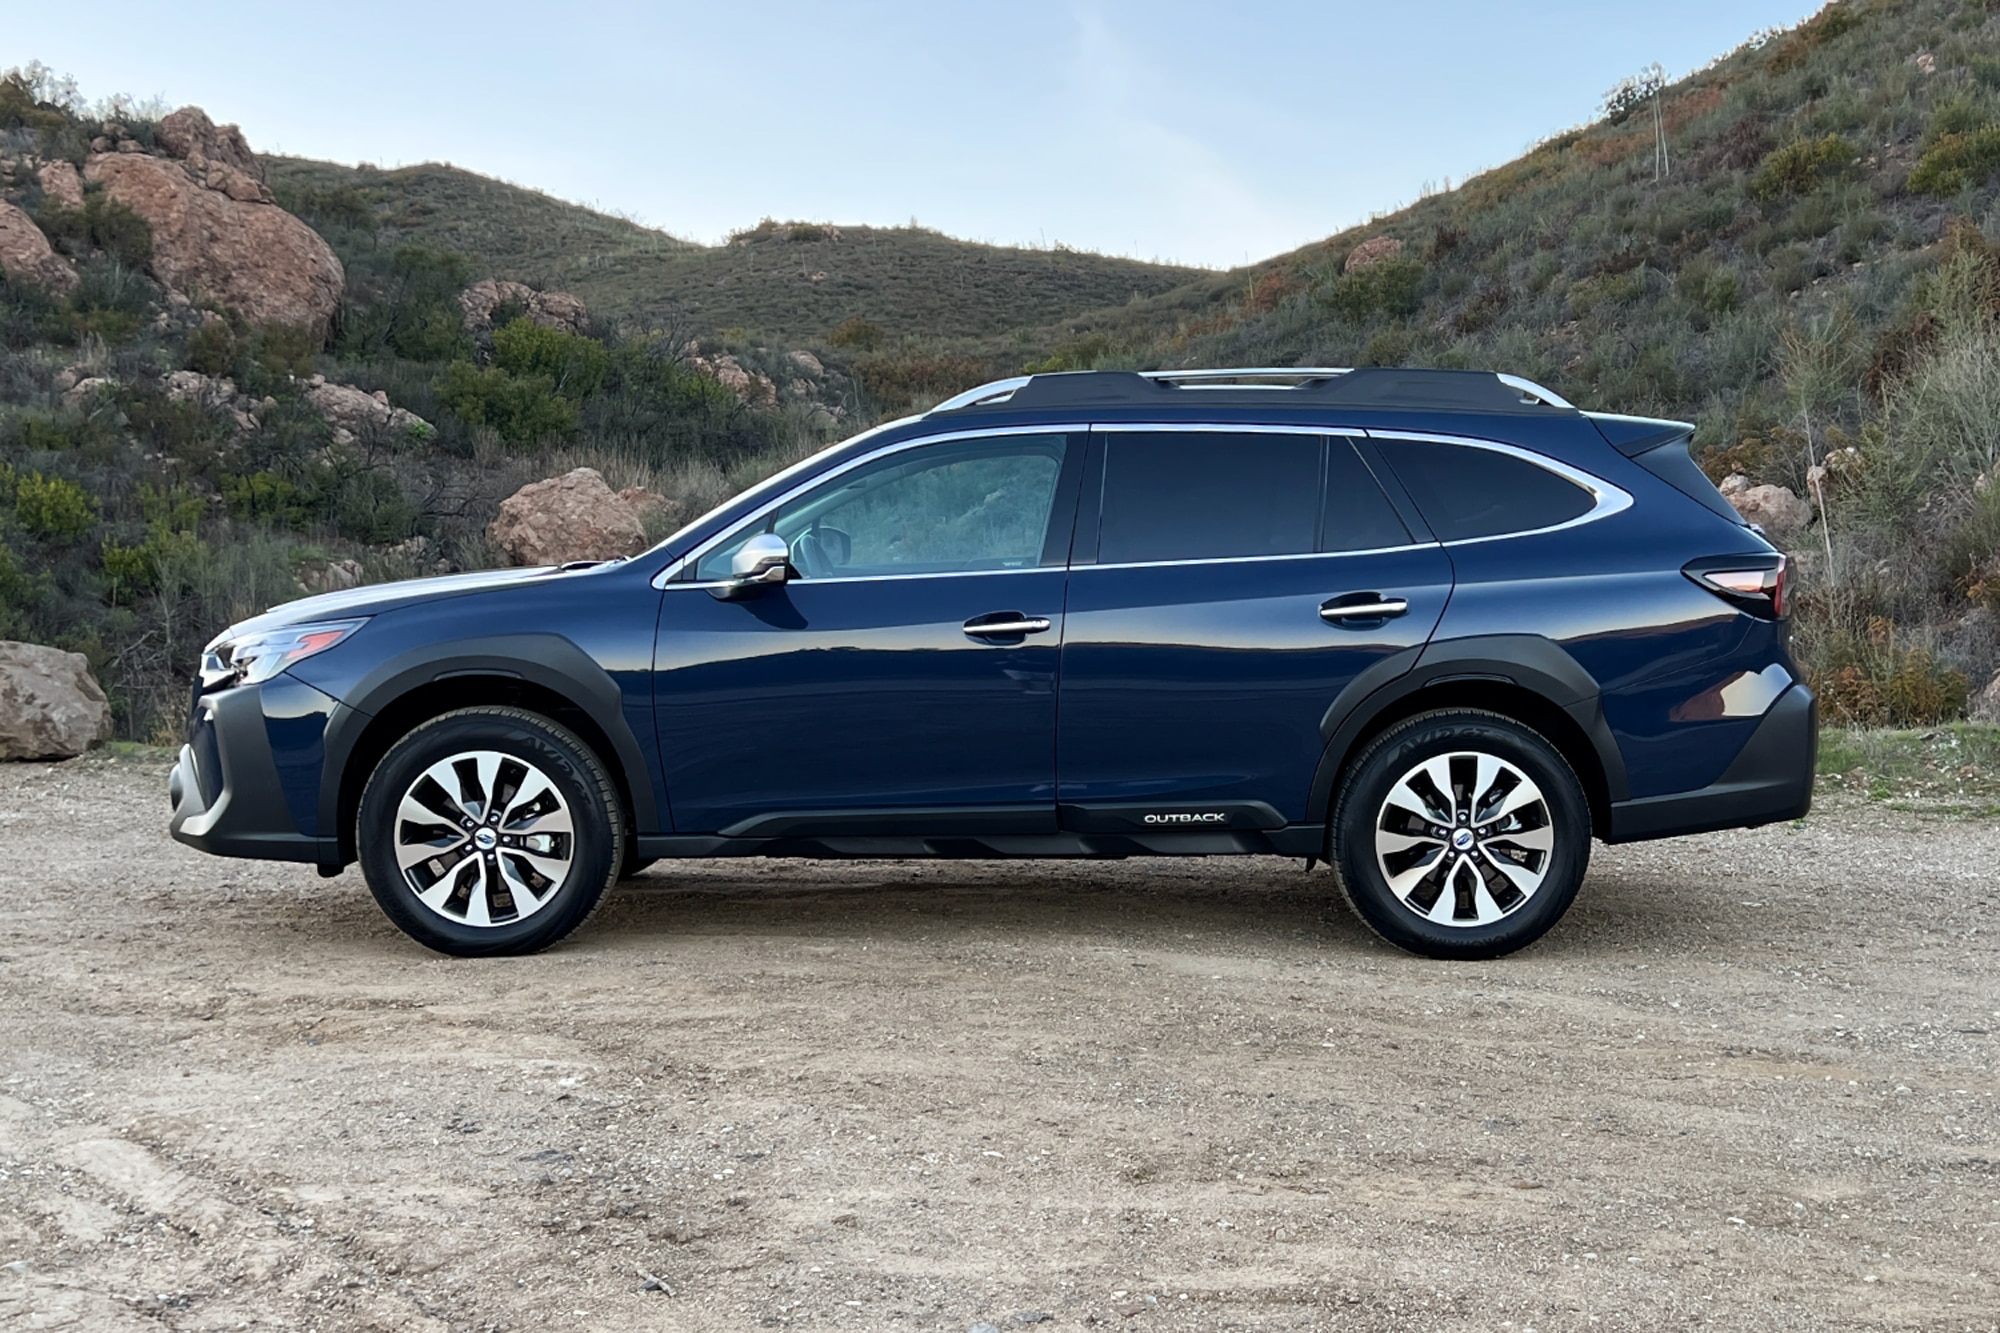 Cosmic Blue 2023 Subaru Outback side view in the mountains